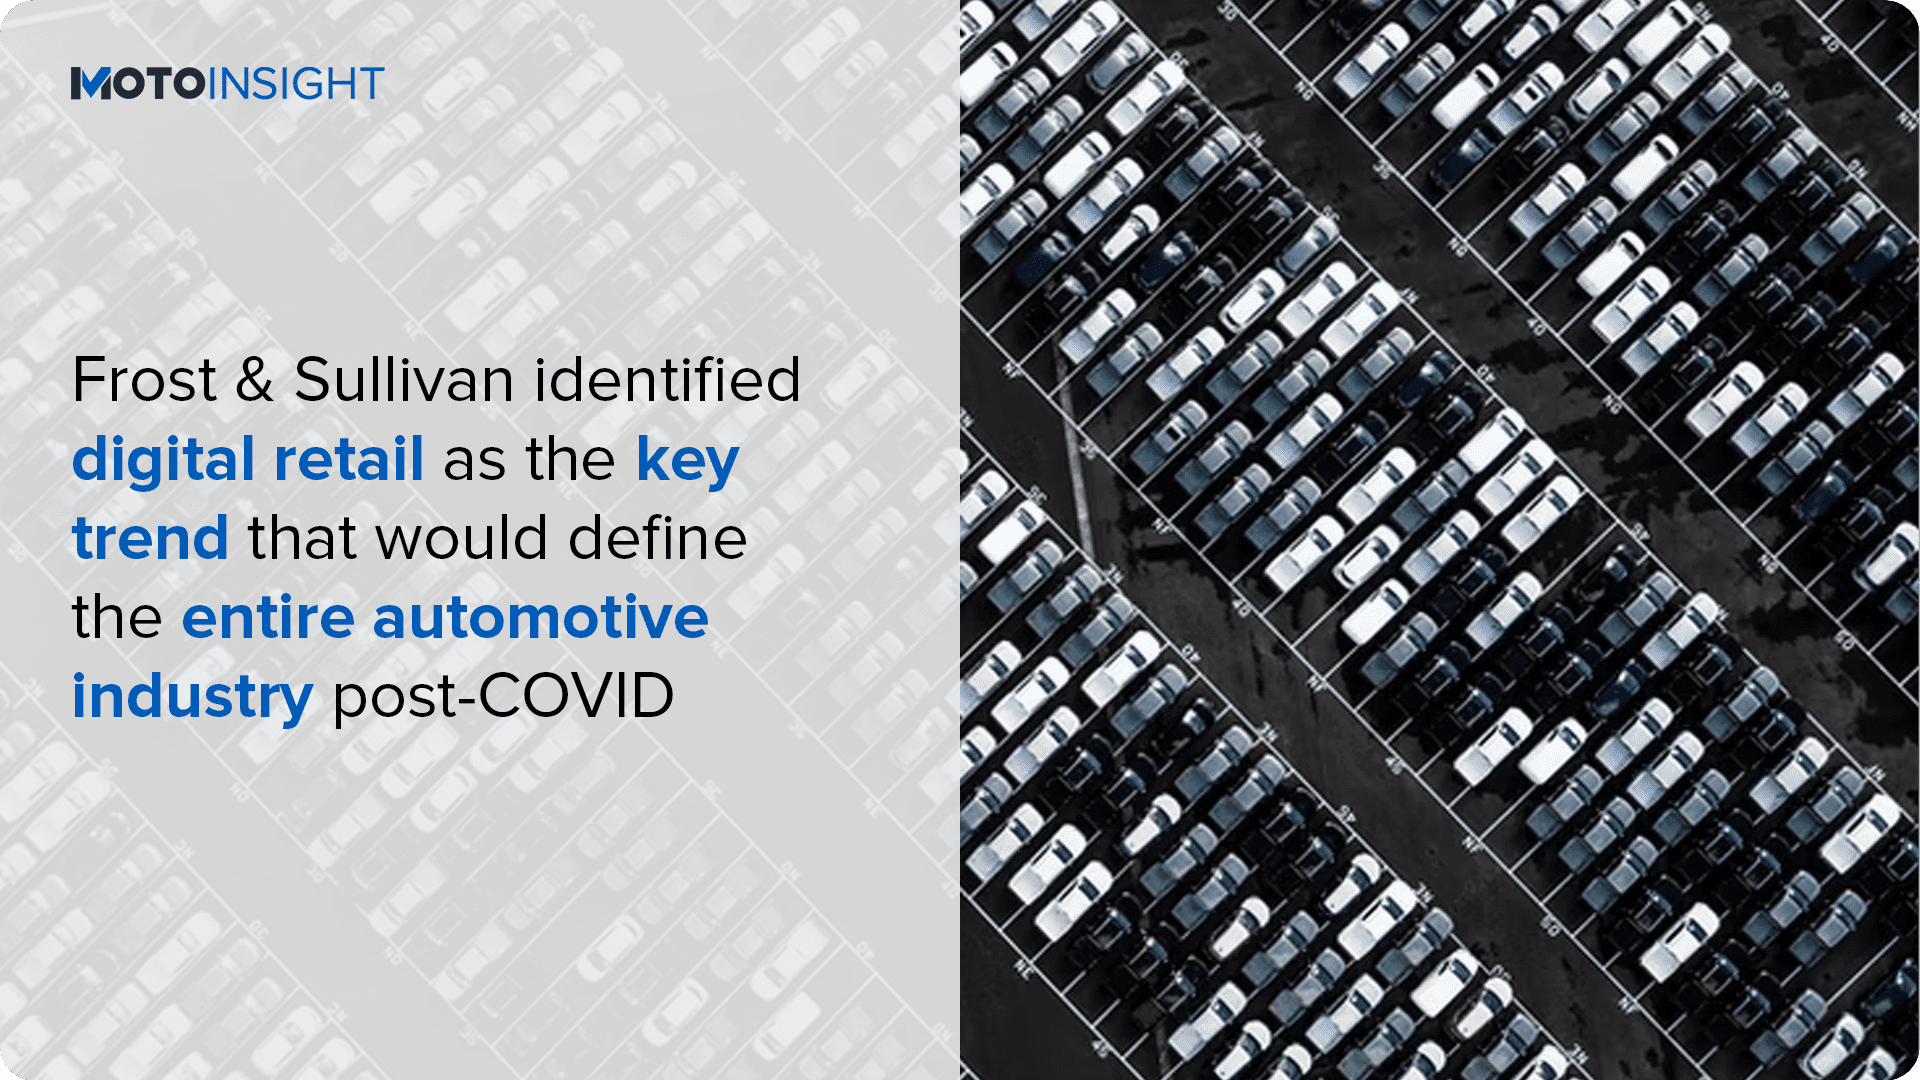 Frost & Sullivan identified digital retail as the key trend that would define the entire automotive industry post-COVID